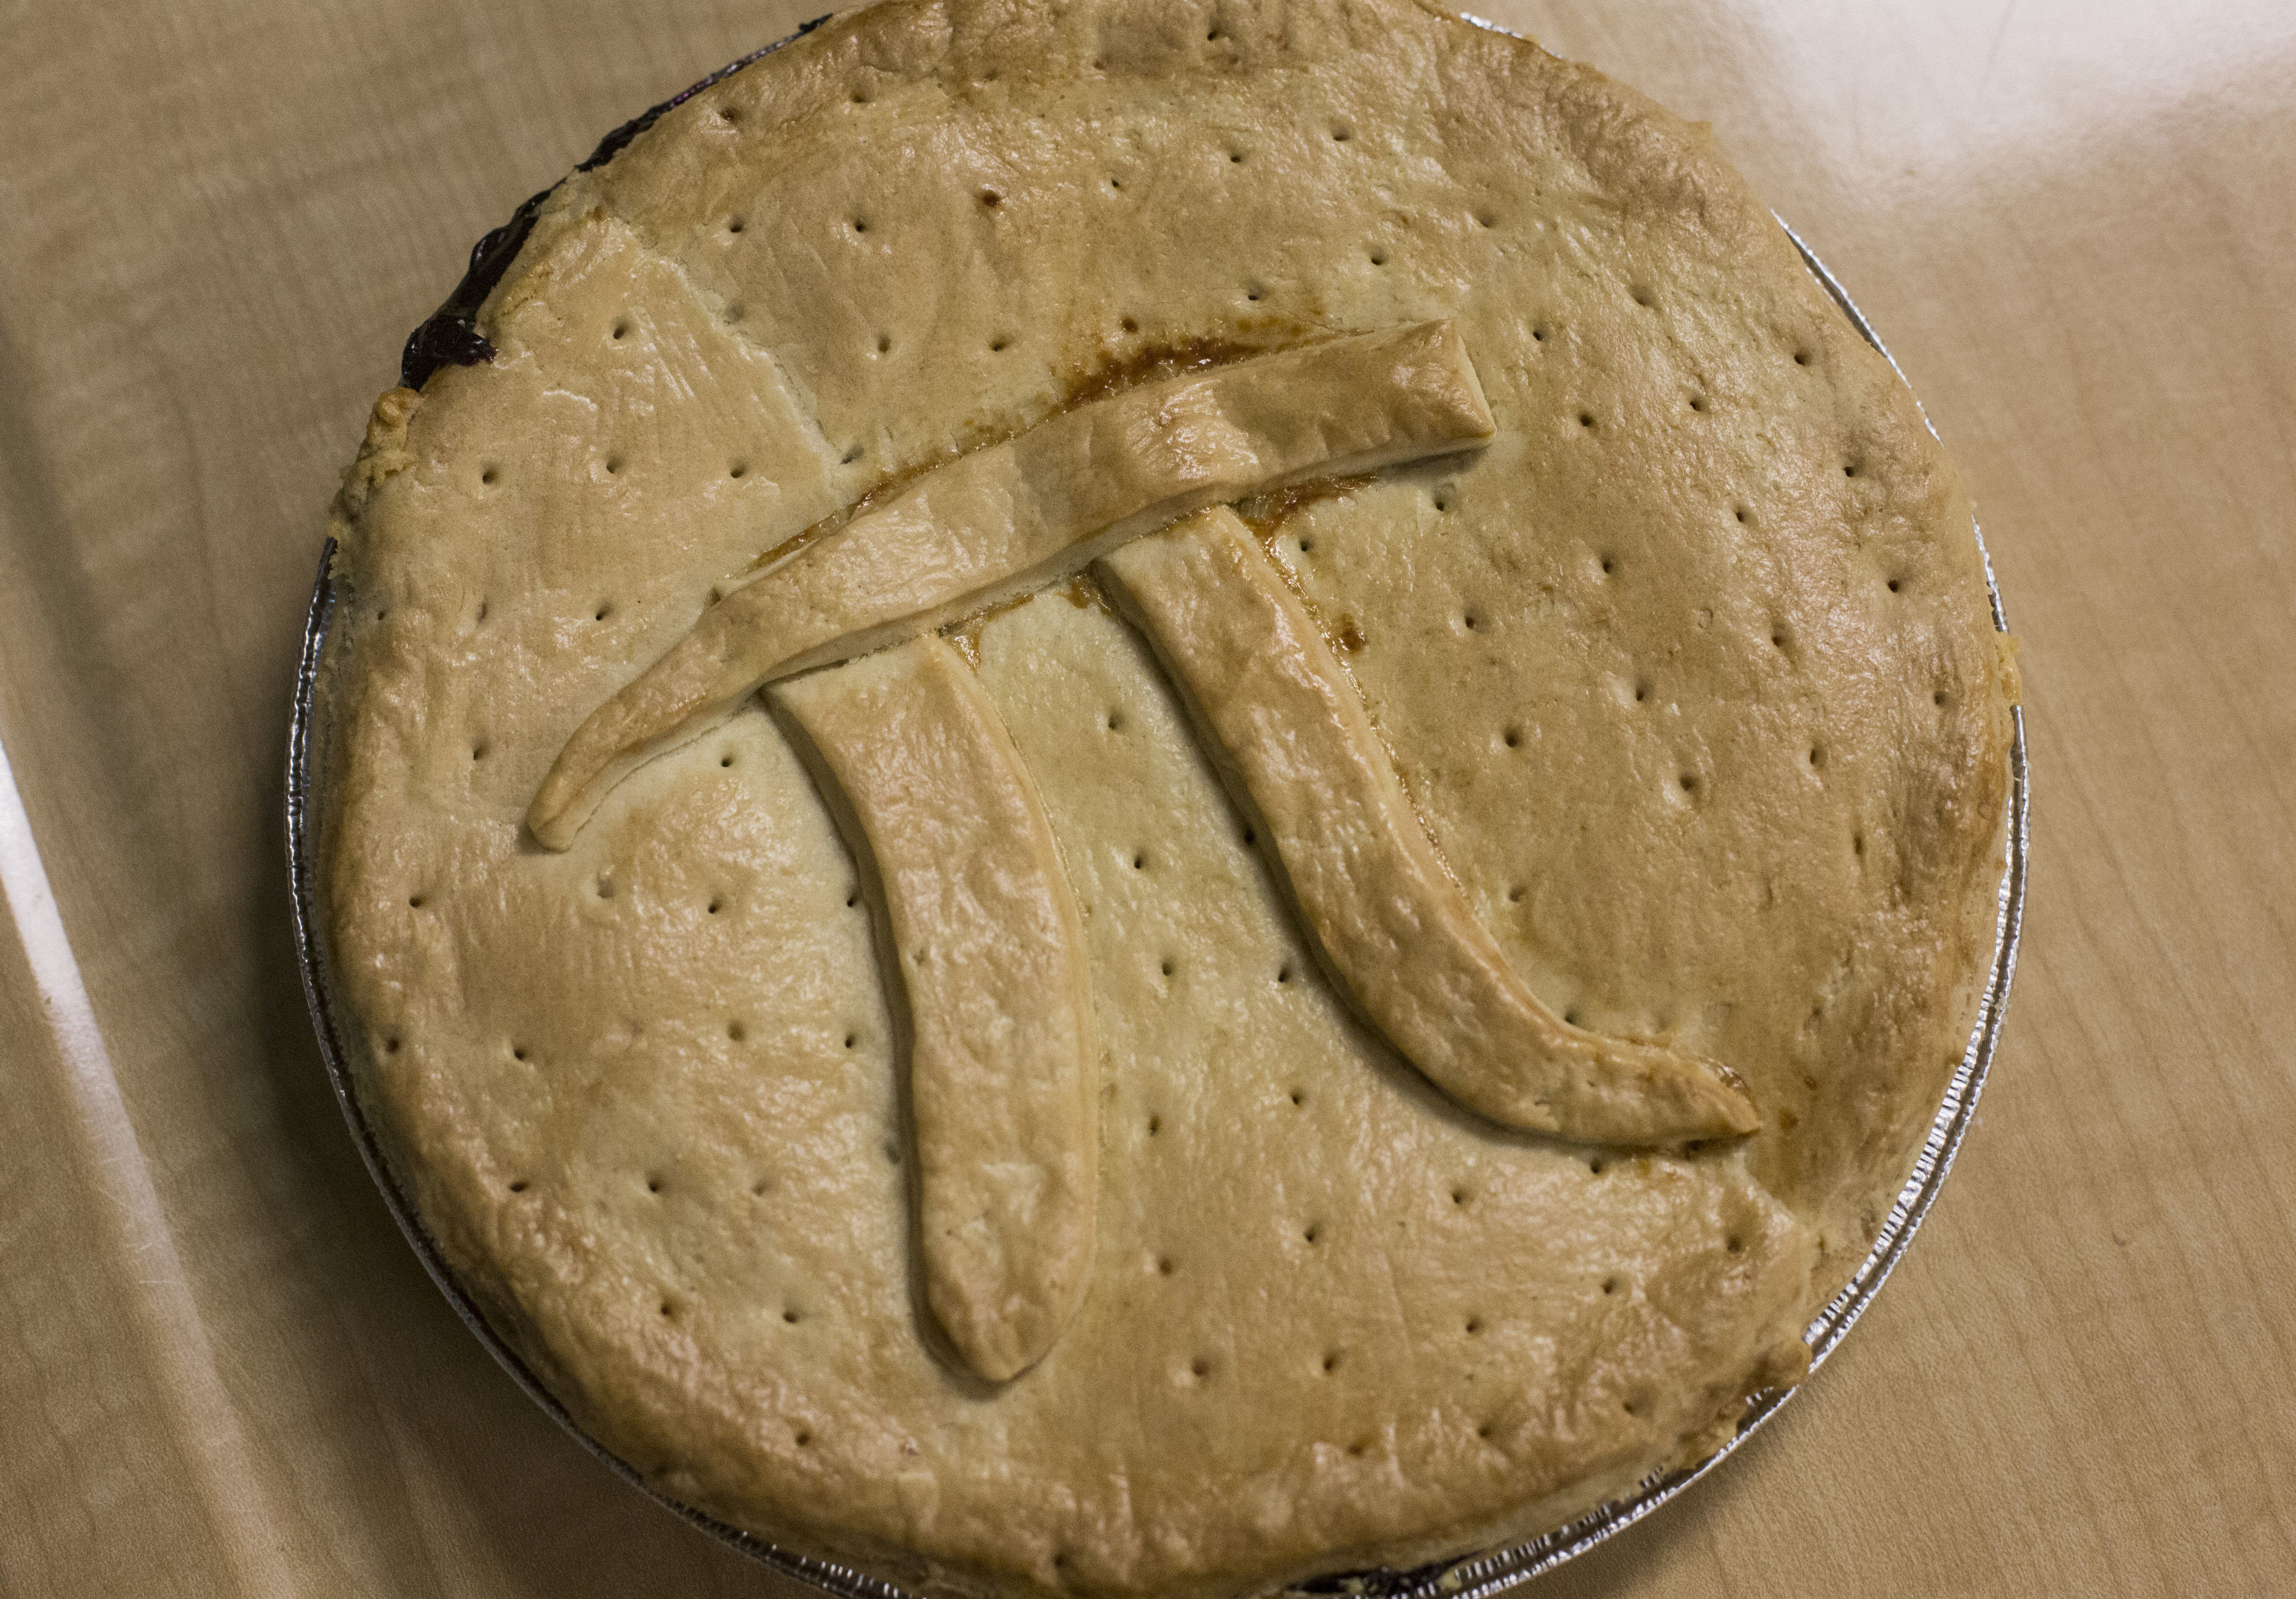  A Pi Day pie from Reilly's Bakery in Biddeford at Biddeford High School